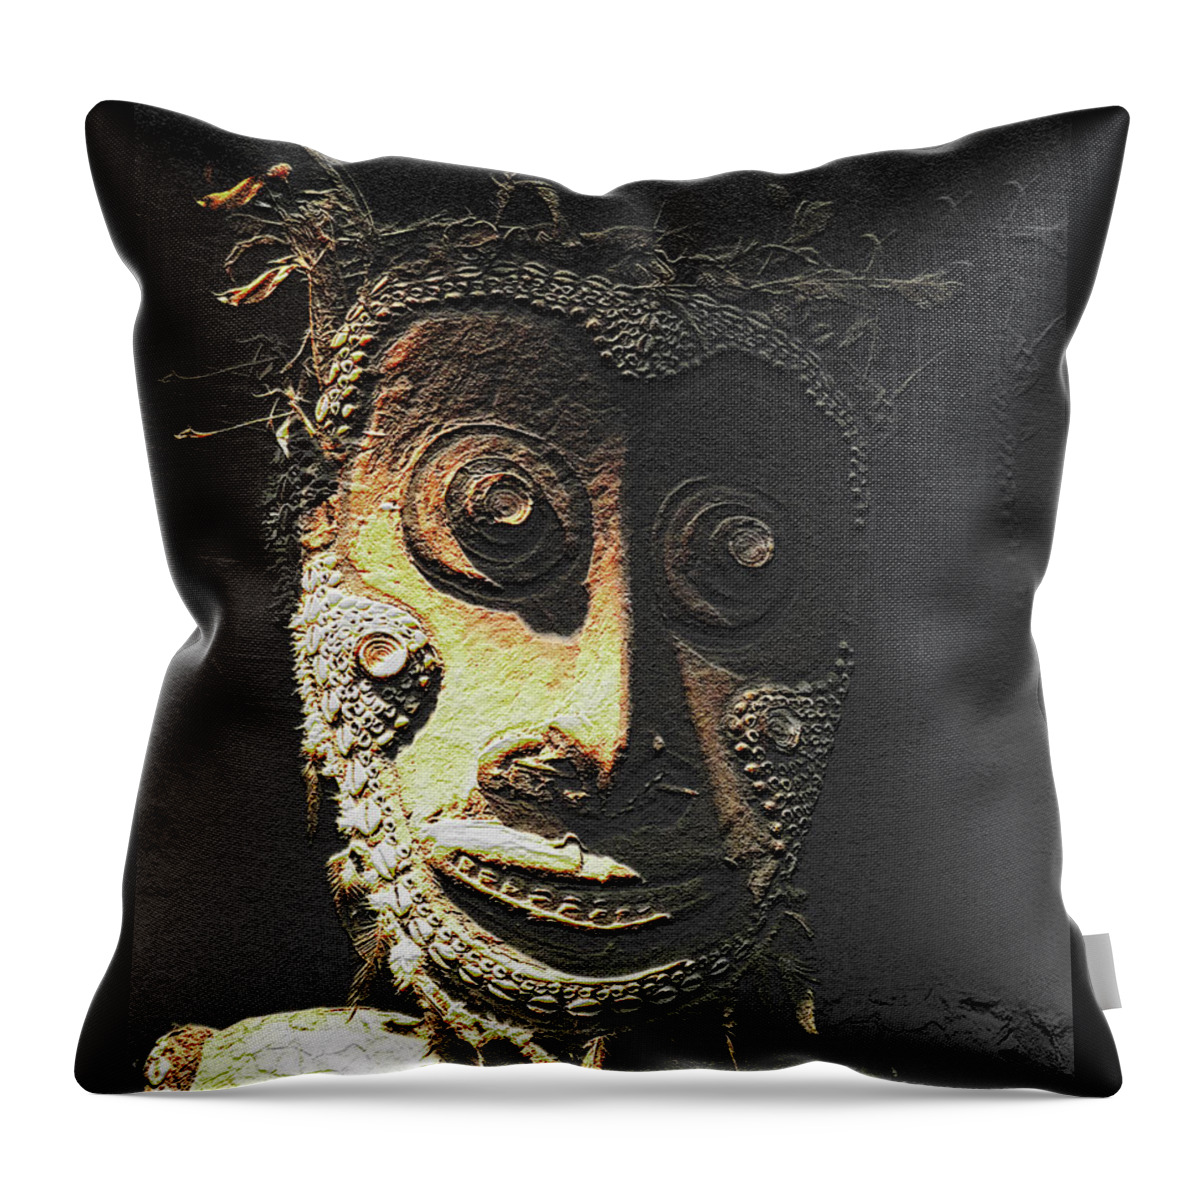 Totem Throw Pillow featuring the photograph Teahead Totem VII by Char Szabo-Perricelli